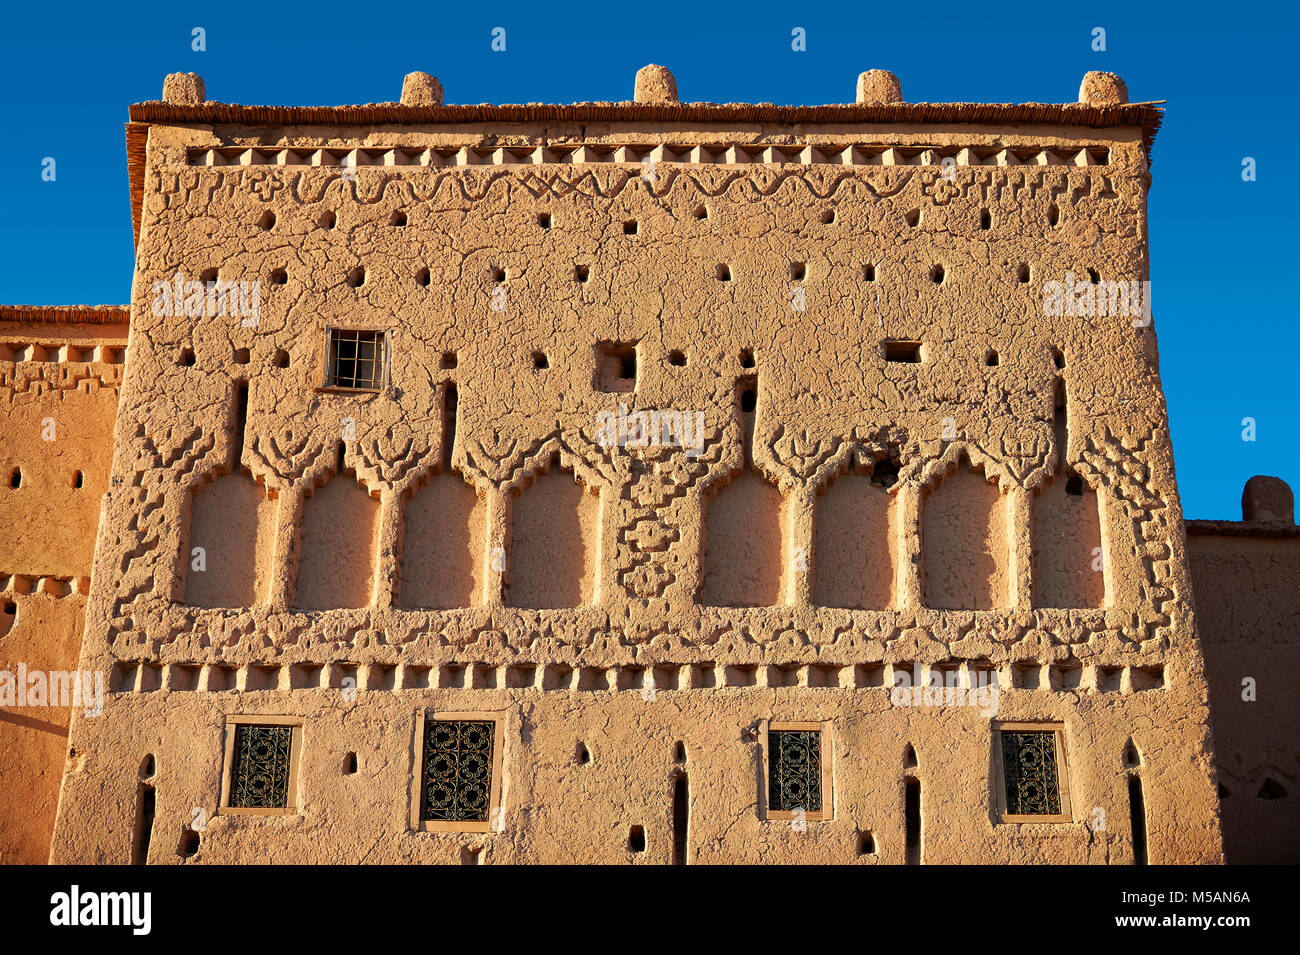 Exterior of the mud brick Kasbah of Taourirt, Ouarzazate, Morocco, built by Pasha Glaoui. A Unesco World Heritage Site Stock Photo